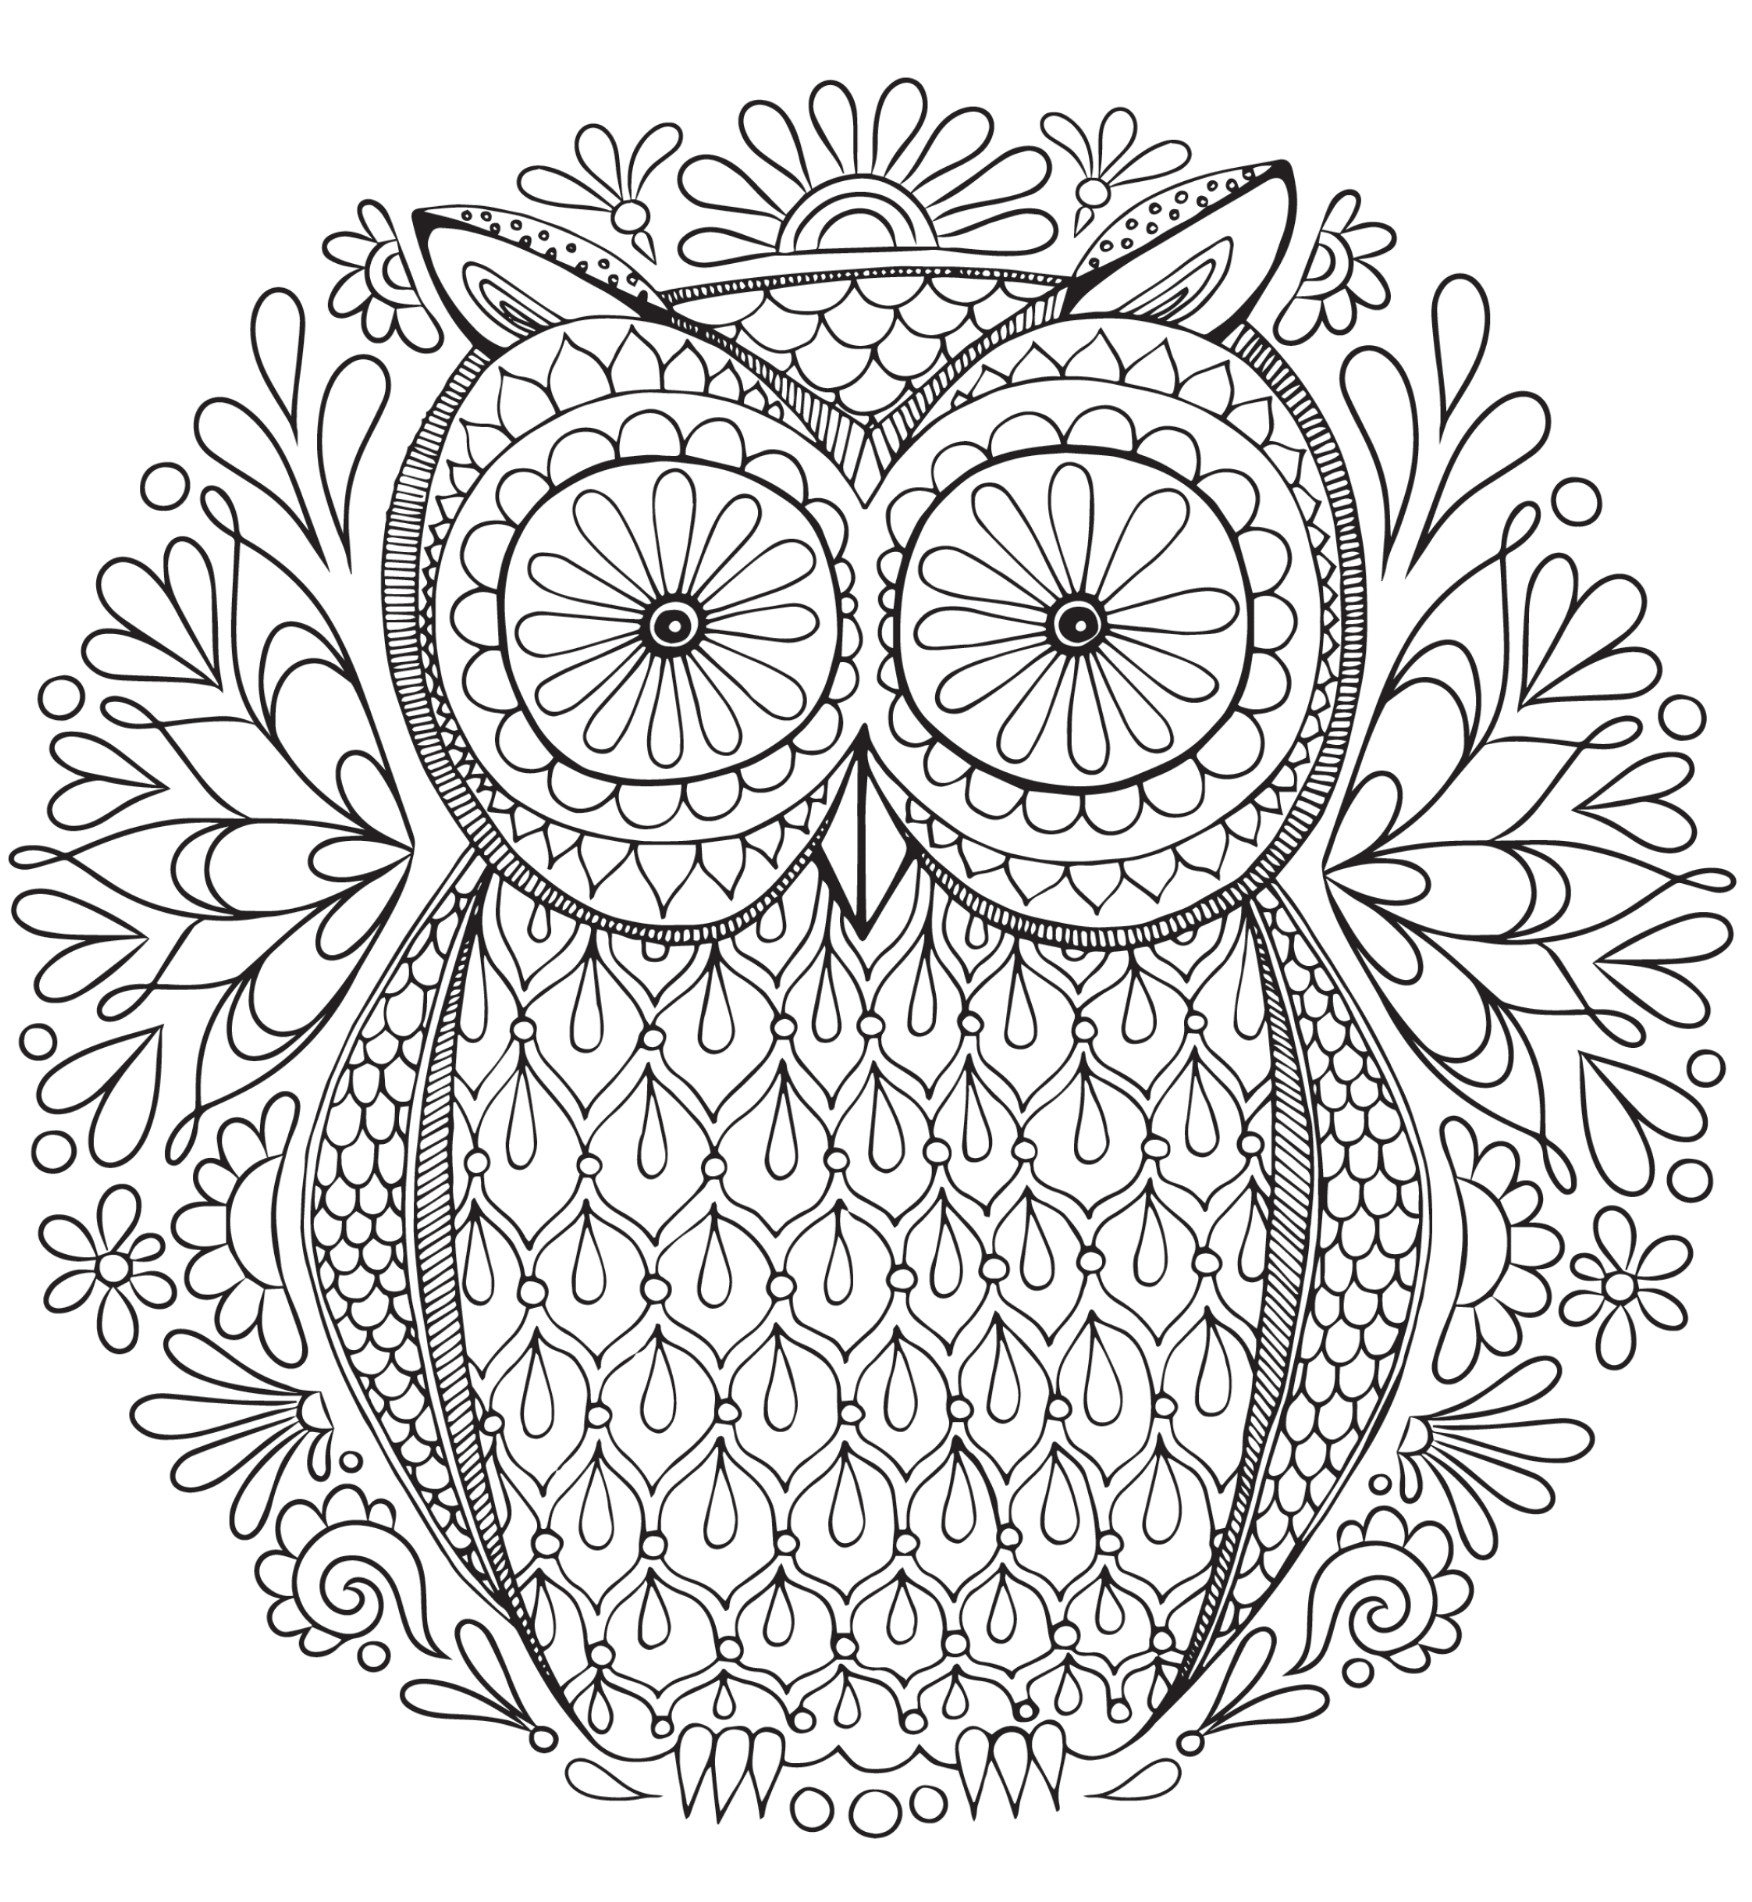 Coloring Pages For Adults Free Printable
 20 Free Adult Colouring Pages The Organised Housewife